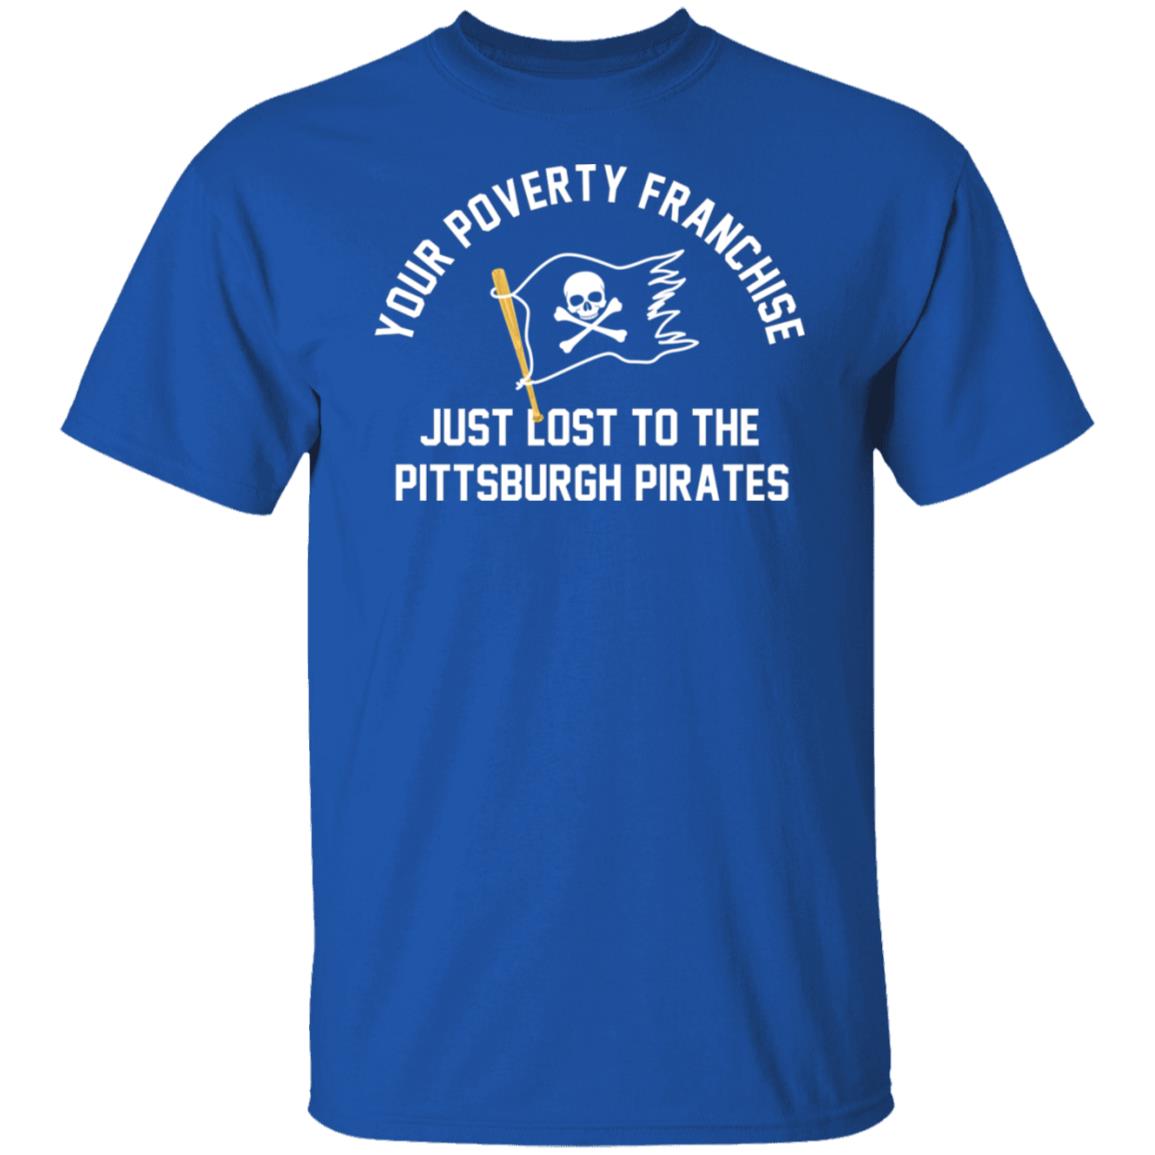 Your Poverty Franchise Just Lost To The Pittsburgh Pirates T-shirt